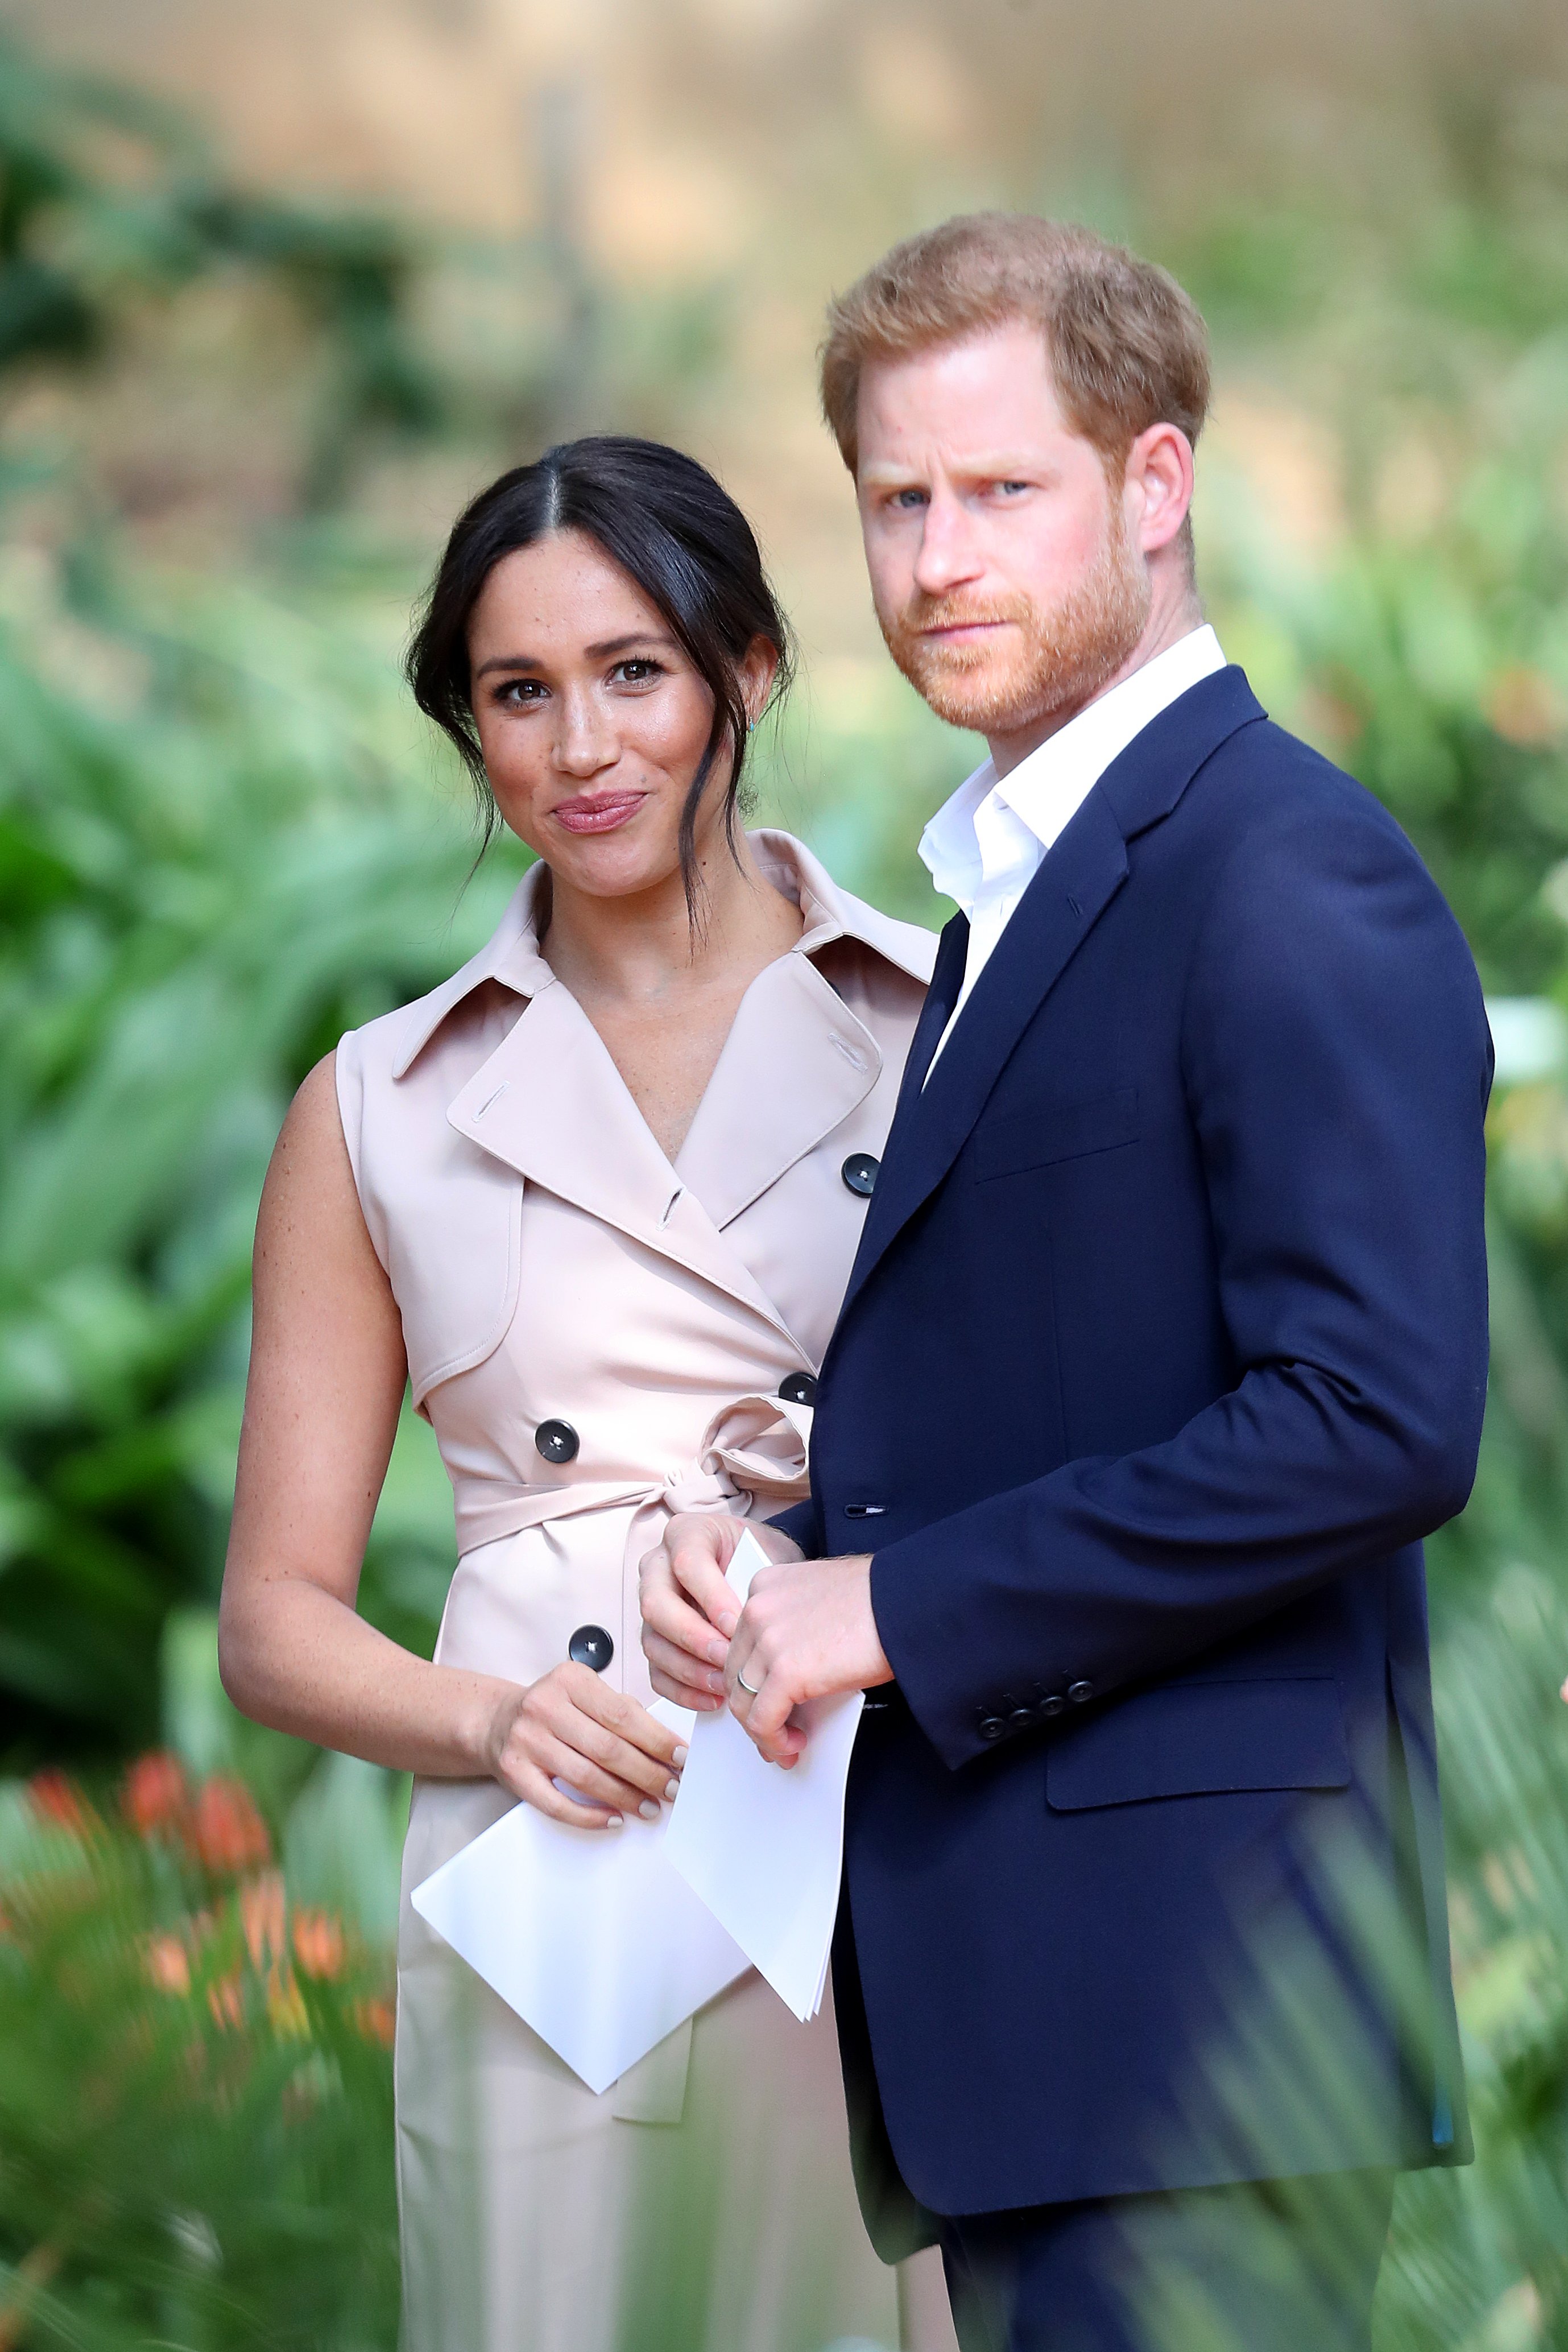 Prince Harry and Meghan Markle on October 02, 2019, in Johannesburg, South Africa.  Source: Getty Images.